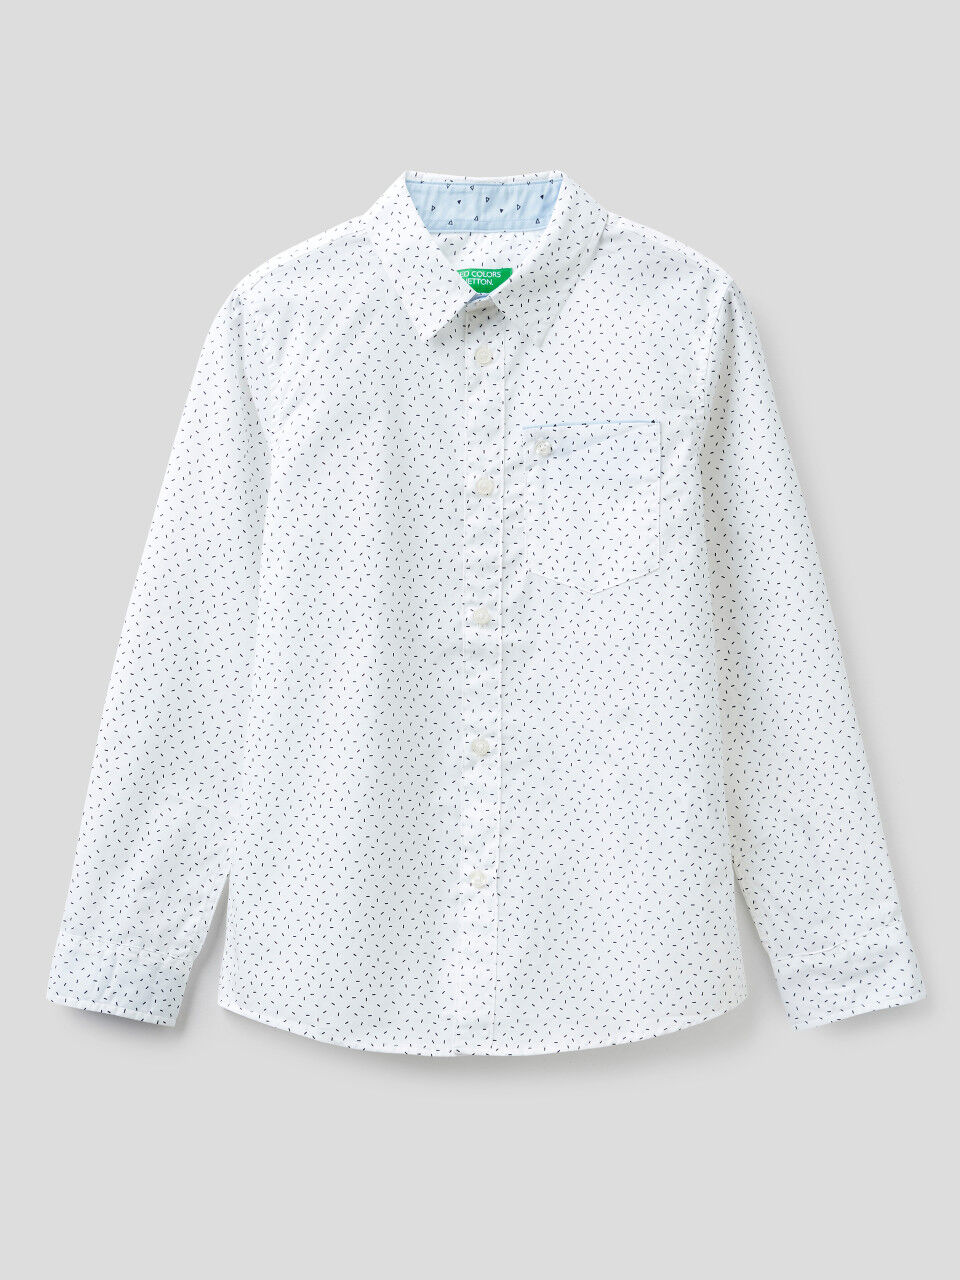 Micro patterned shirt with pocket